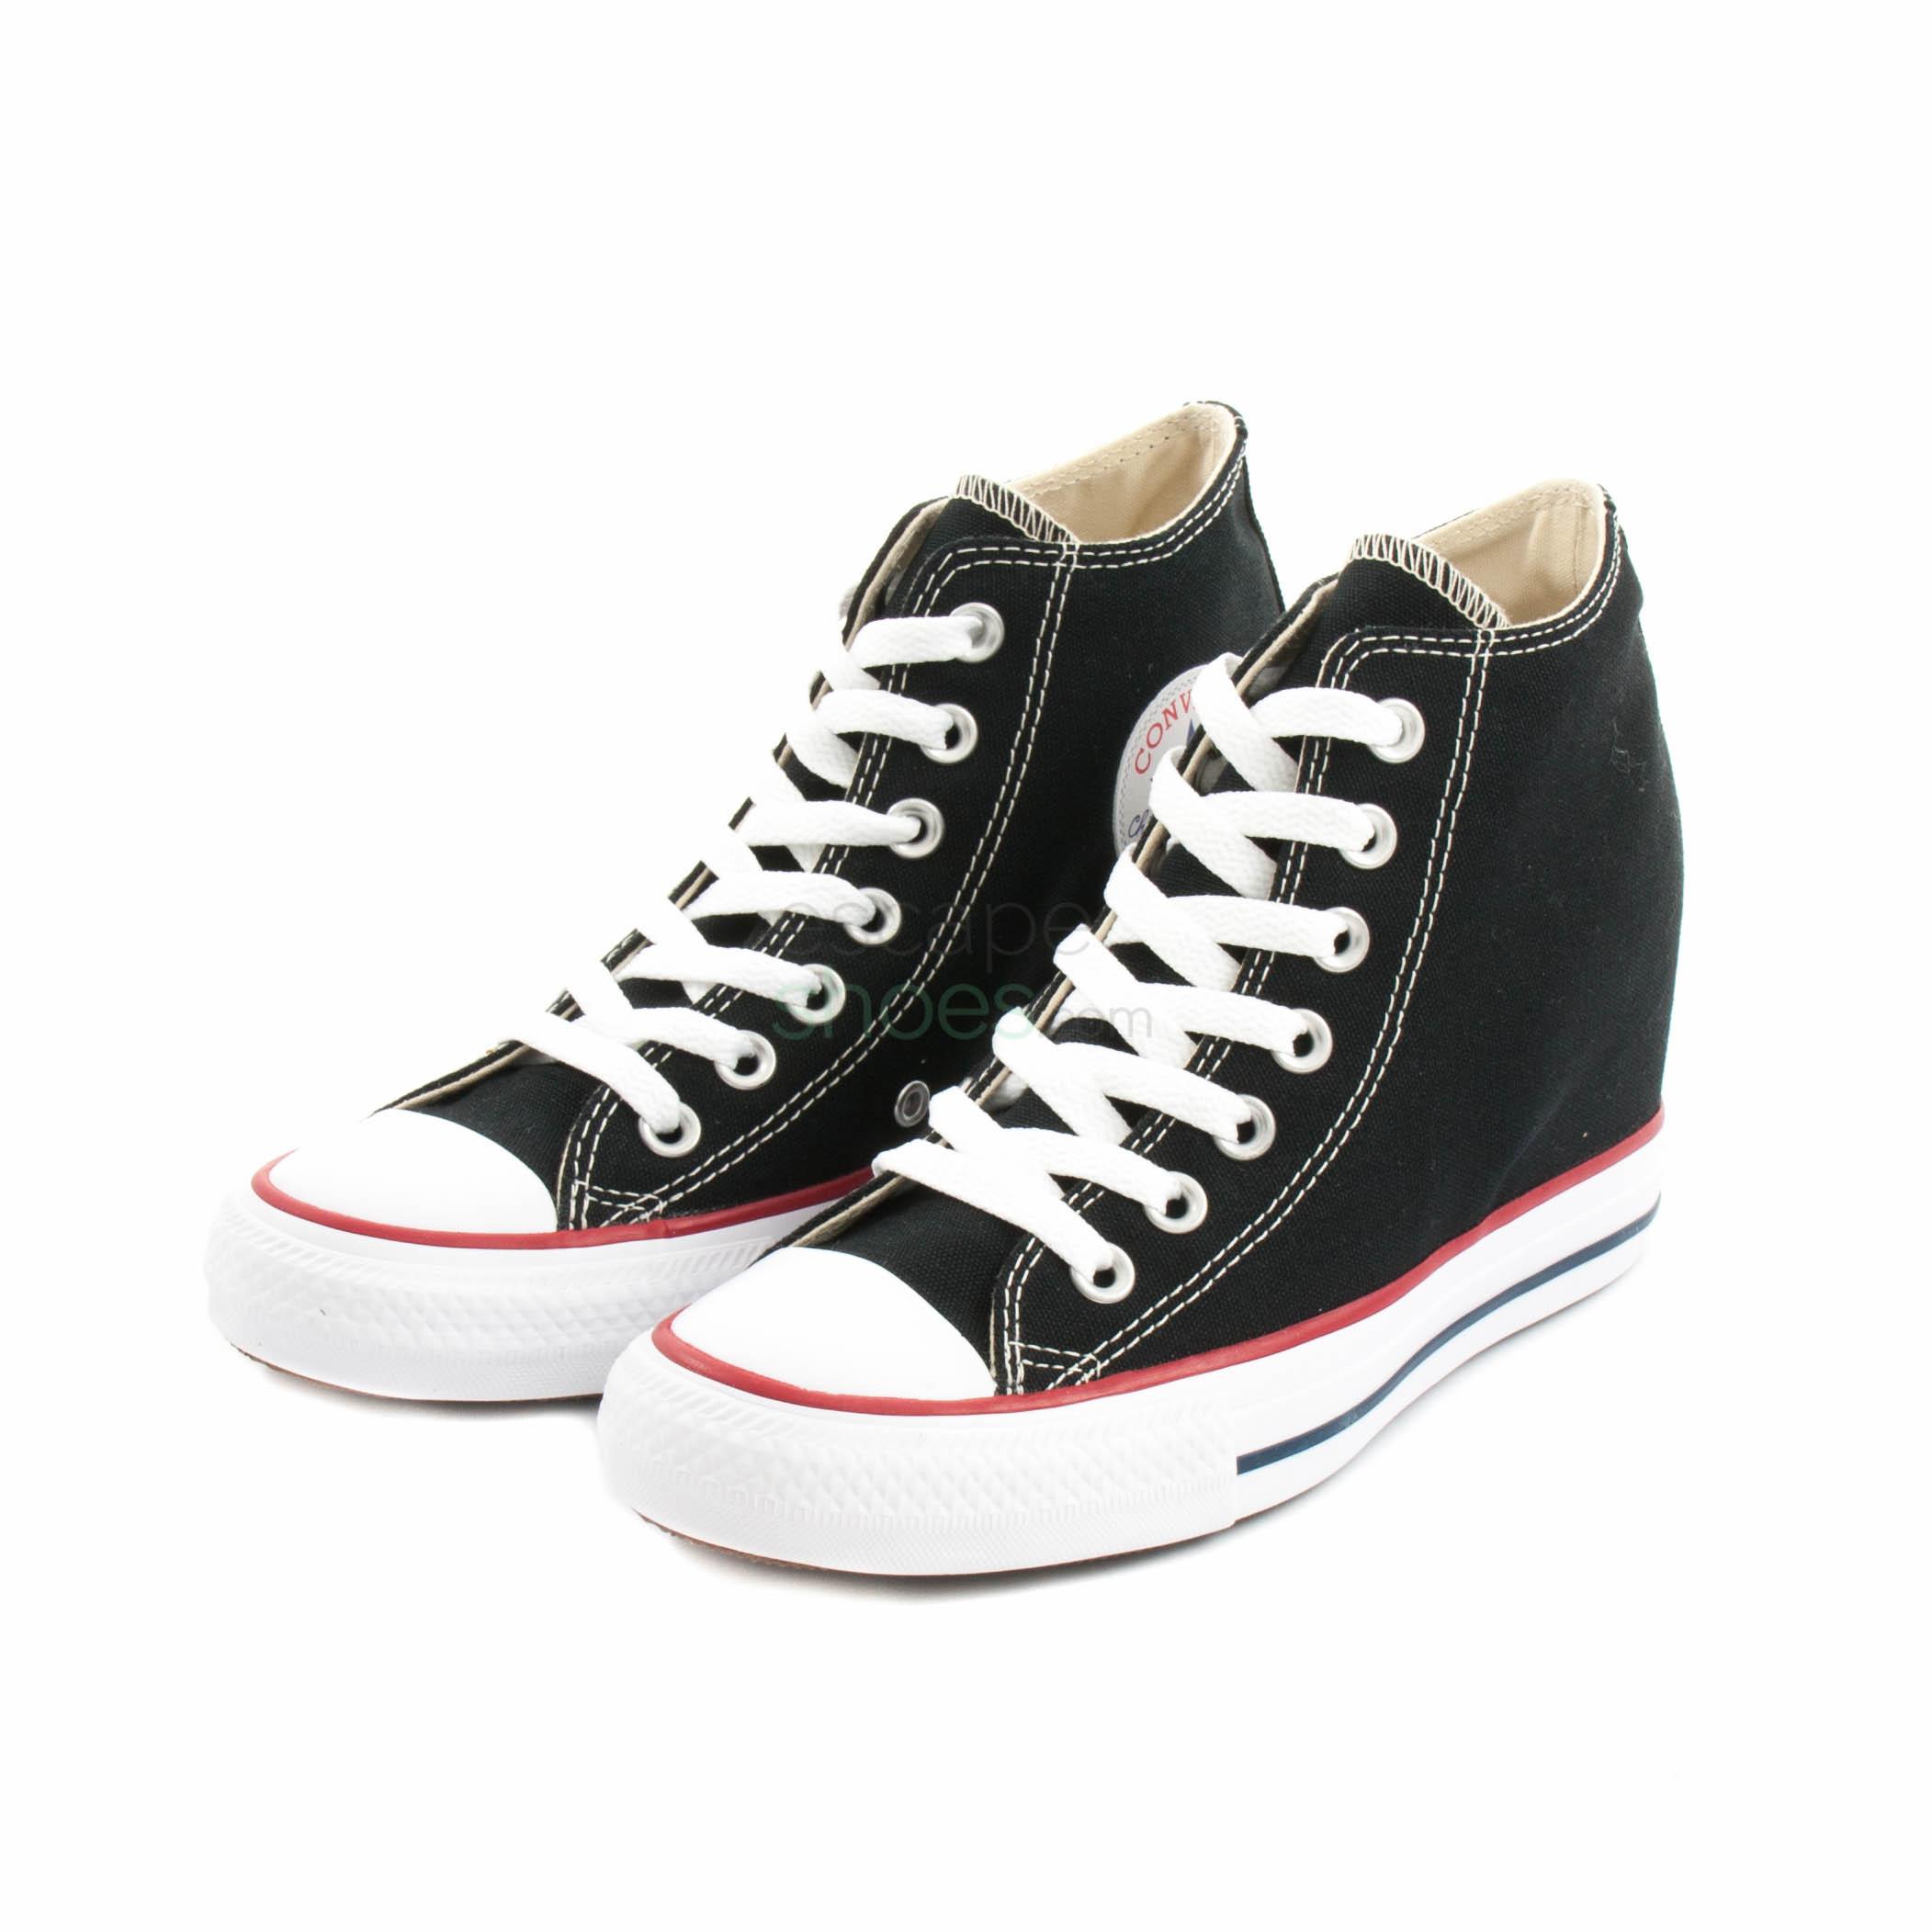 Sneakers CONVERSE Chuck Taylor All Star Lux 547198C 001 Mid Black